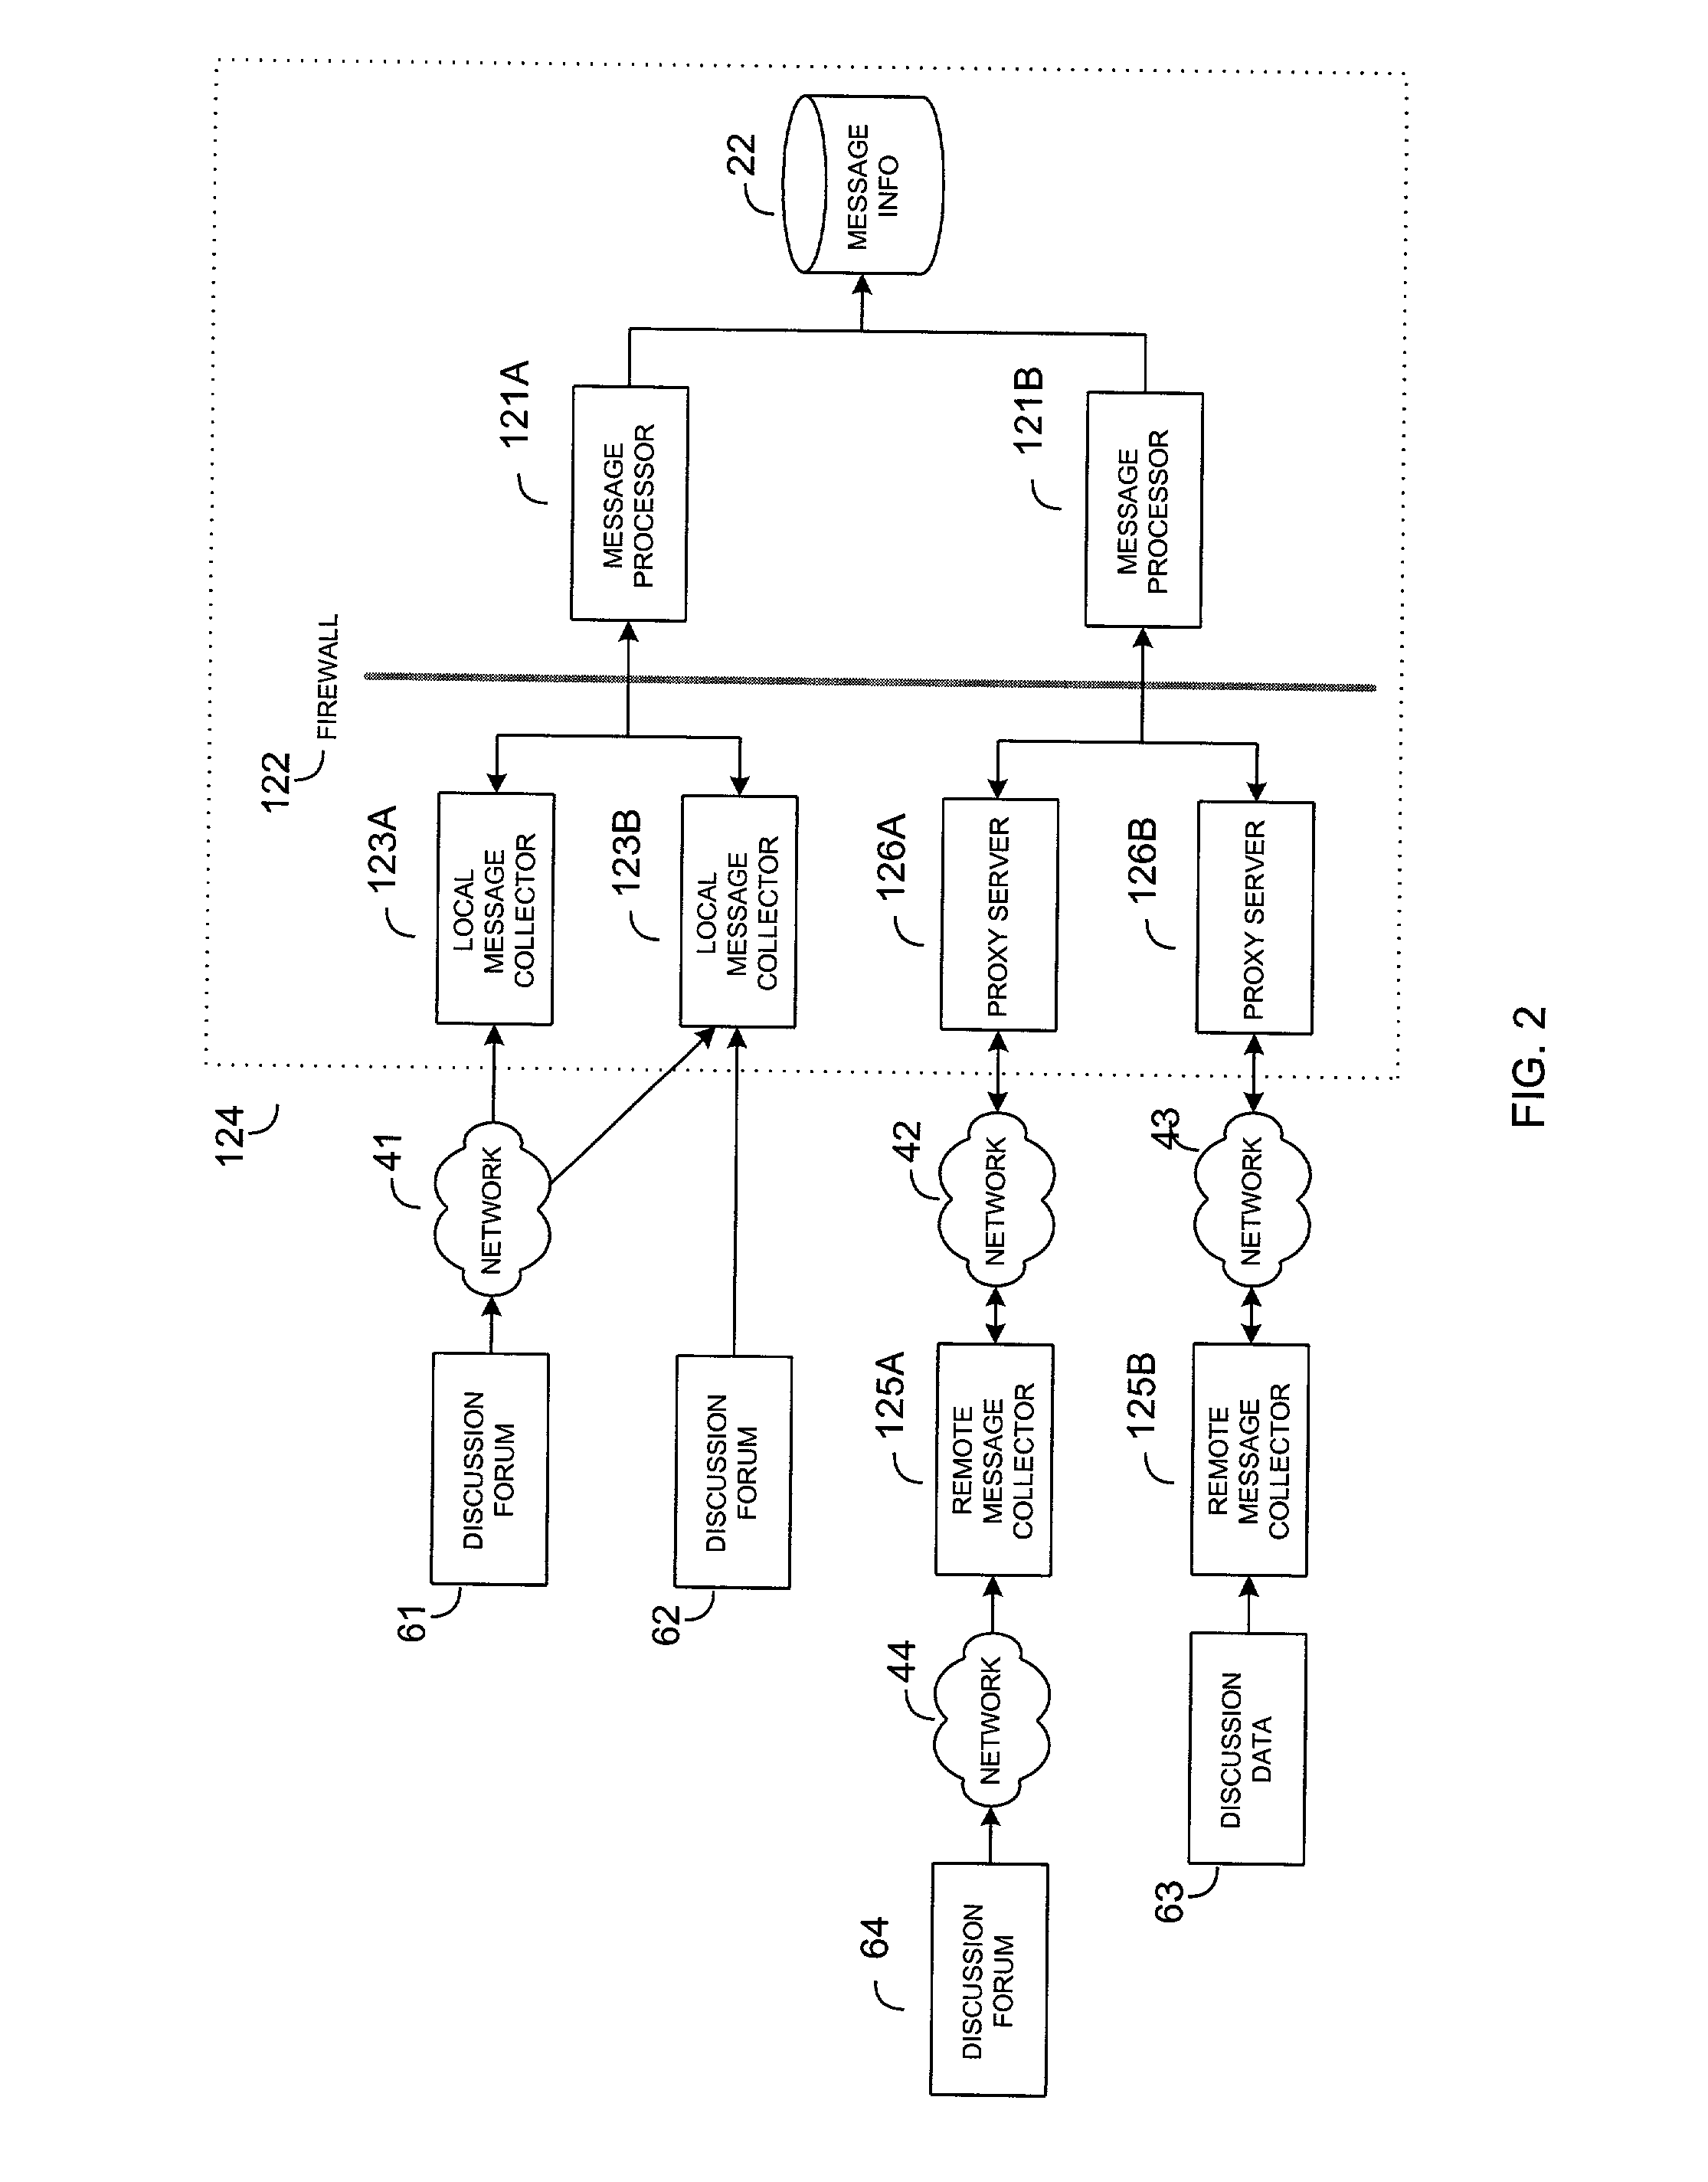 System and method for scoring electronic messages